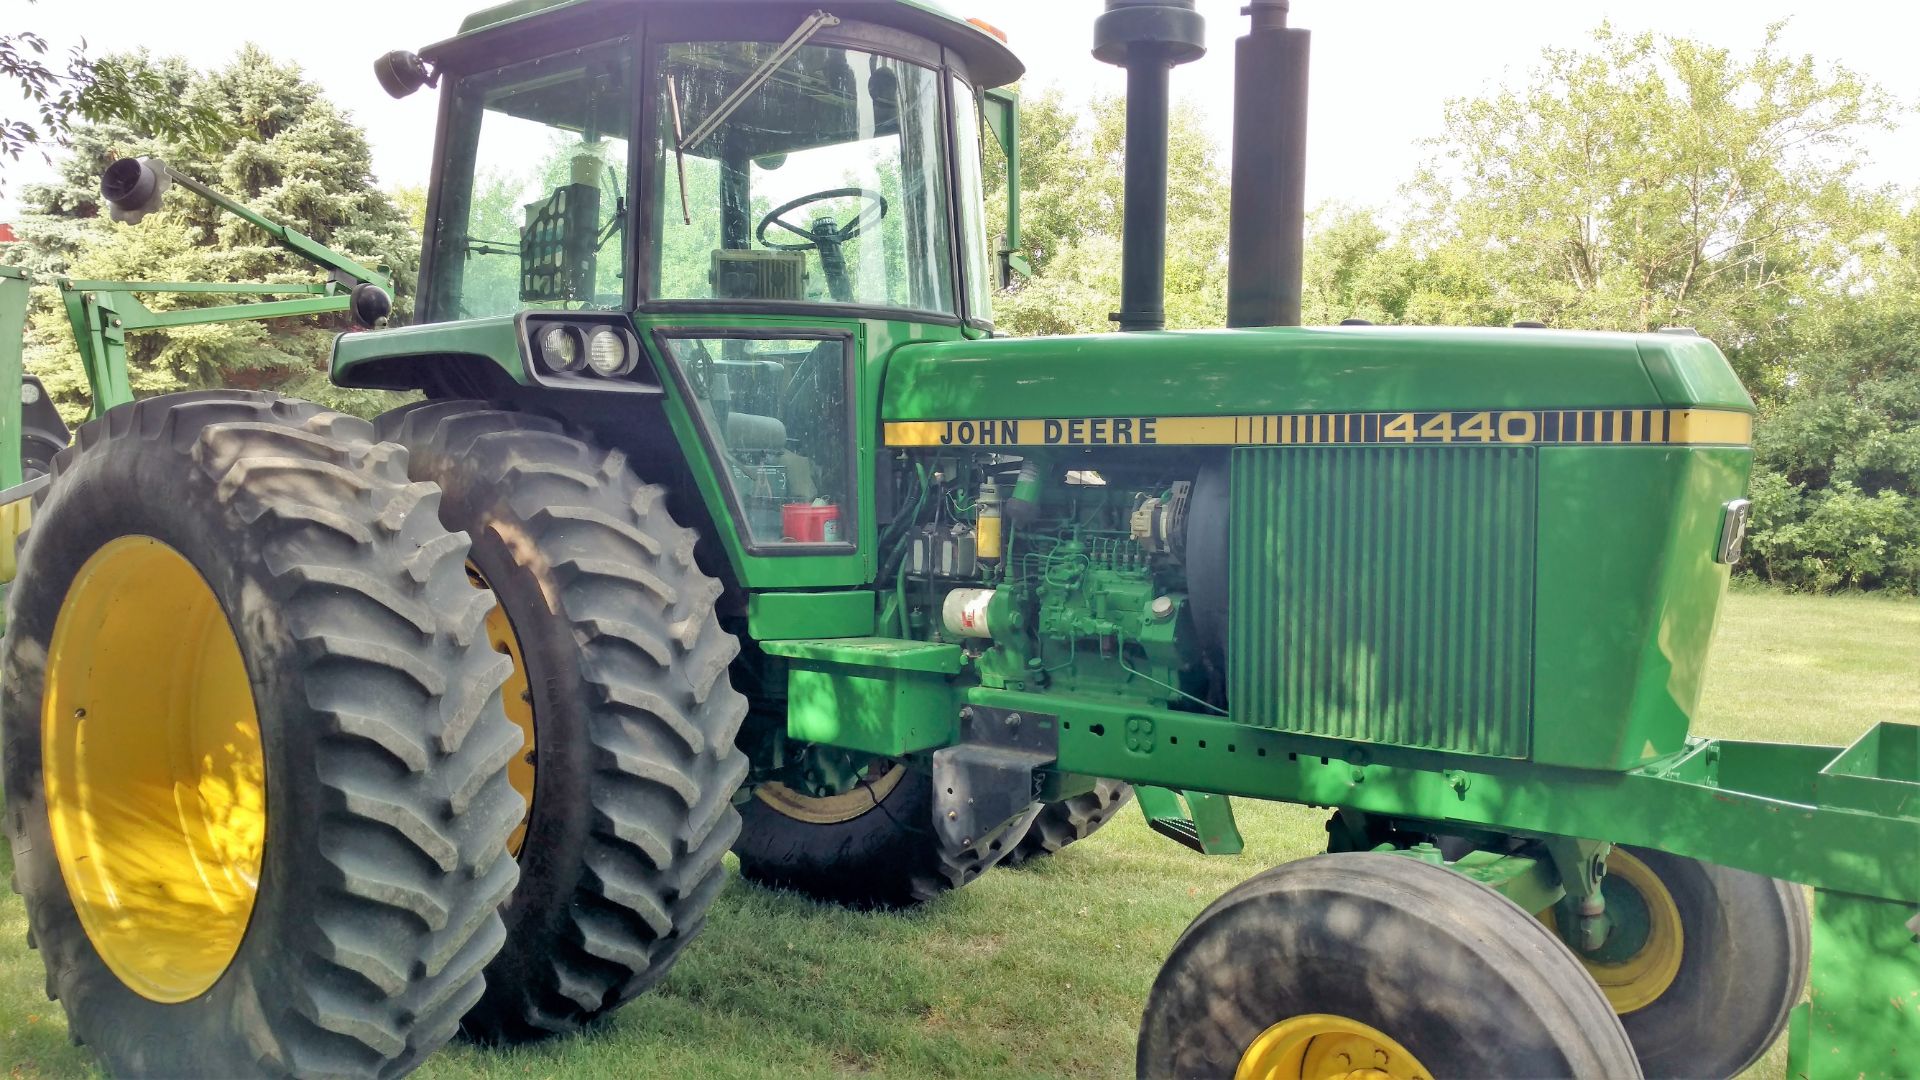 J.D. 4440 Tractor (1982 model) 5287 hours, Power Shift, 18.4 x 42" Tires and Duals, Front Rock - Image 3 of 3